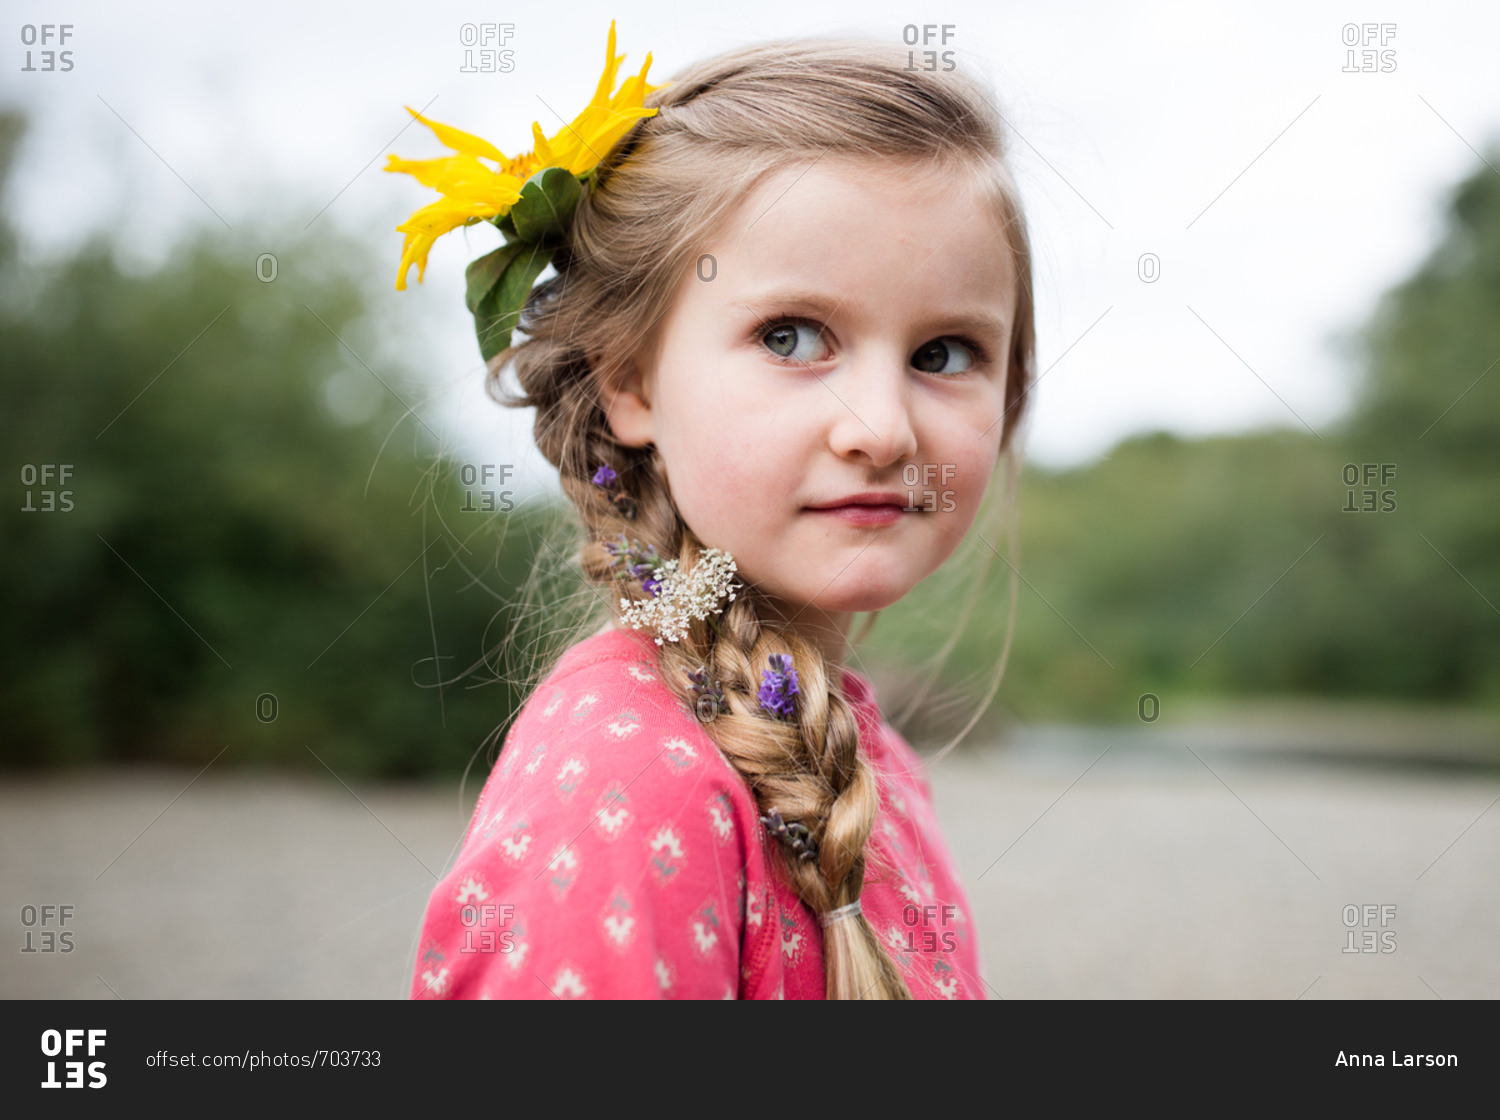 Portrait of a young blonde girl with a yellow flower in her hair